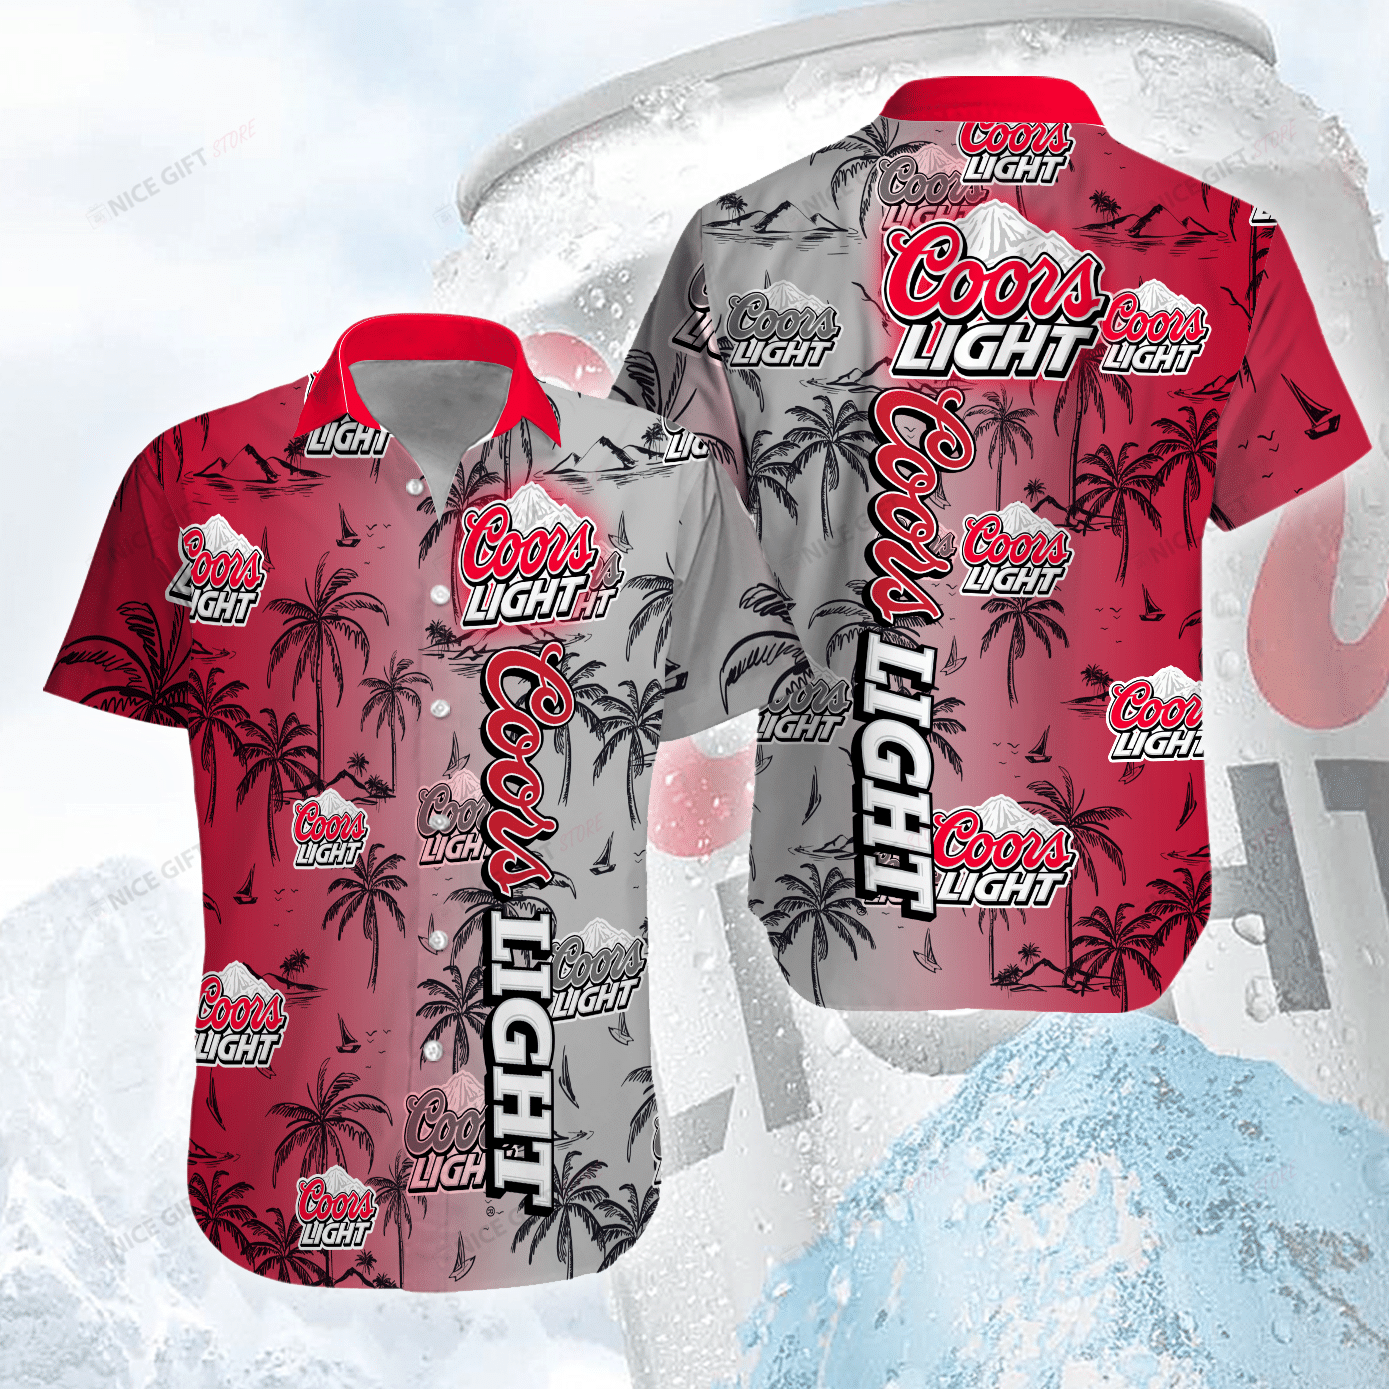 Check out our latest Hawaii Shirt! 11